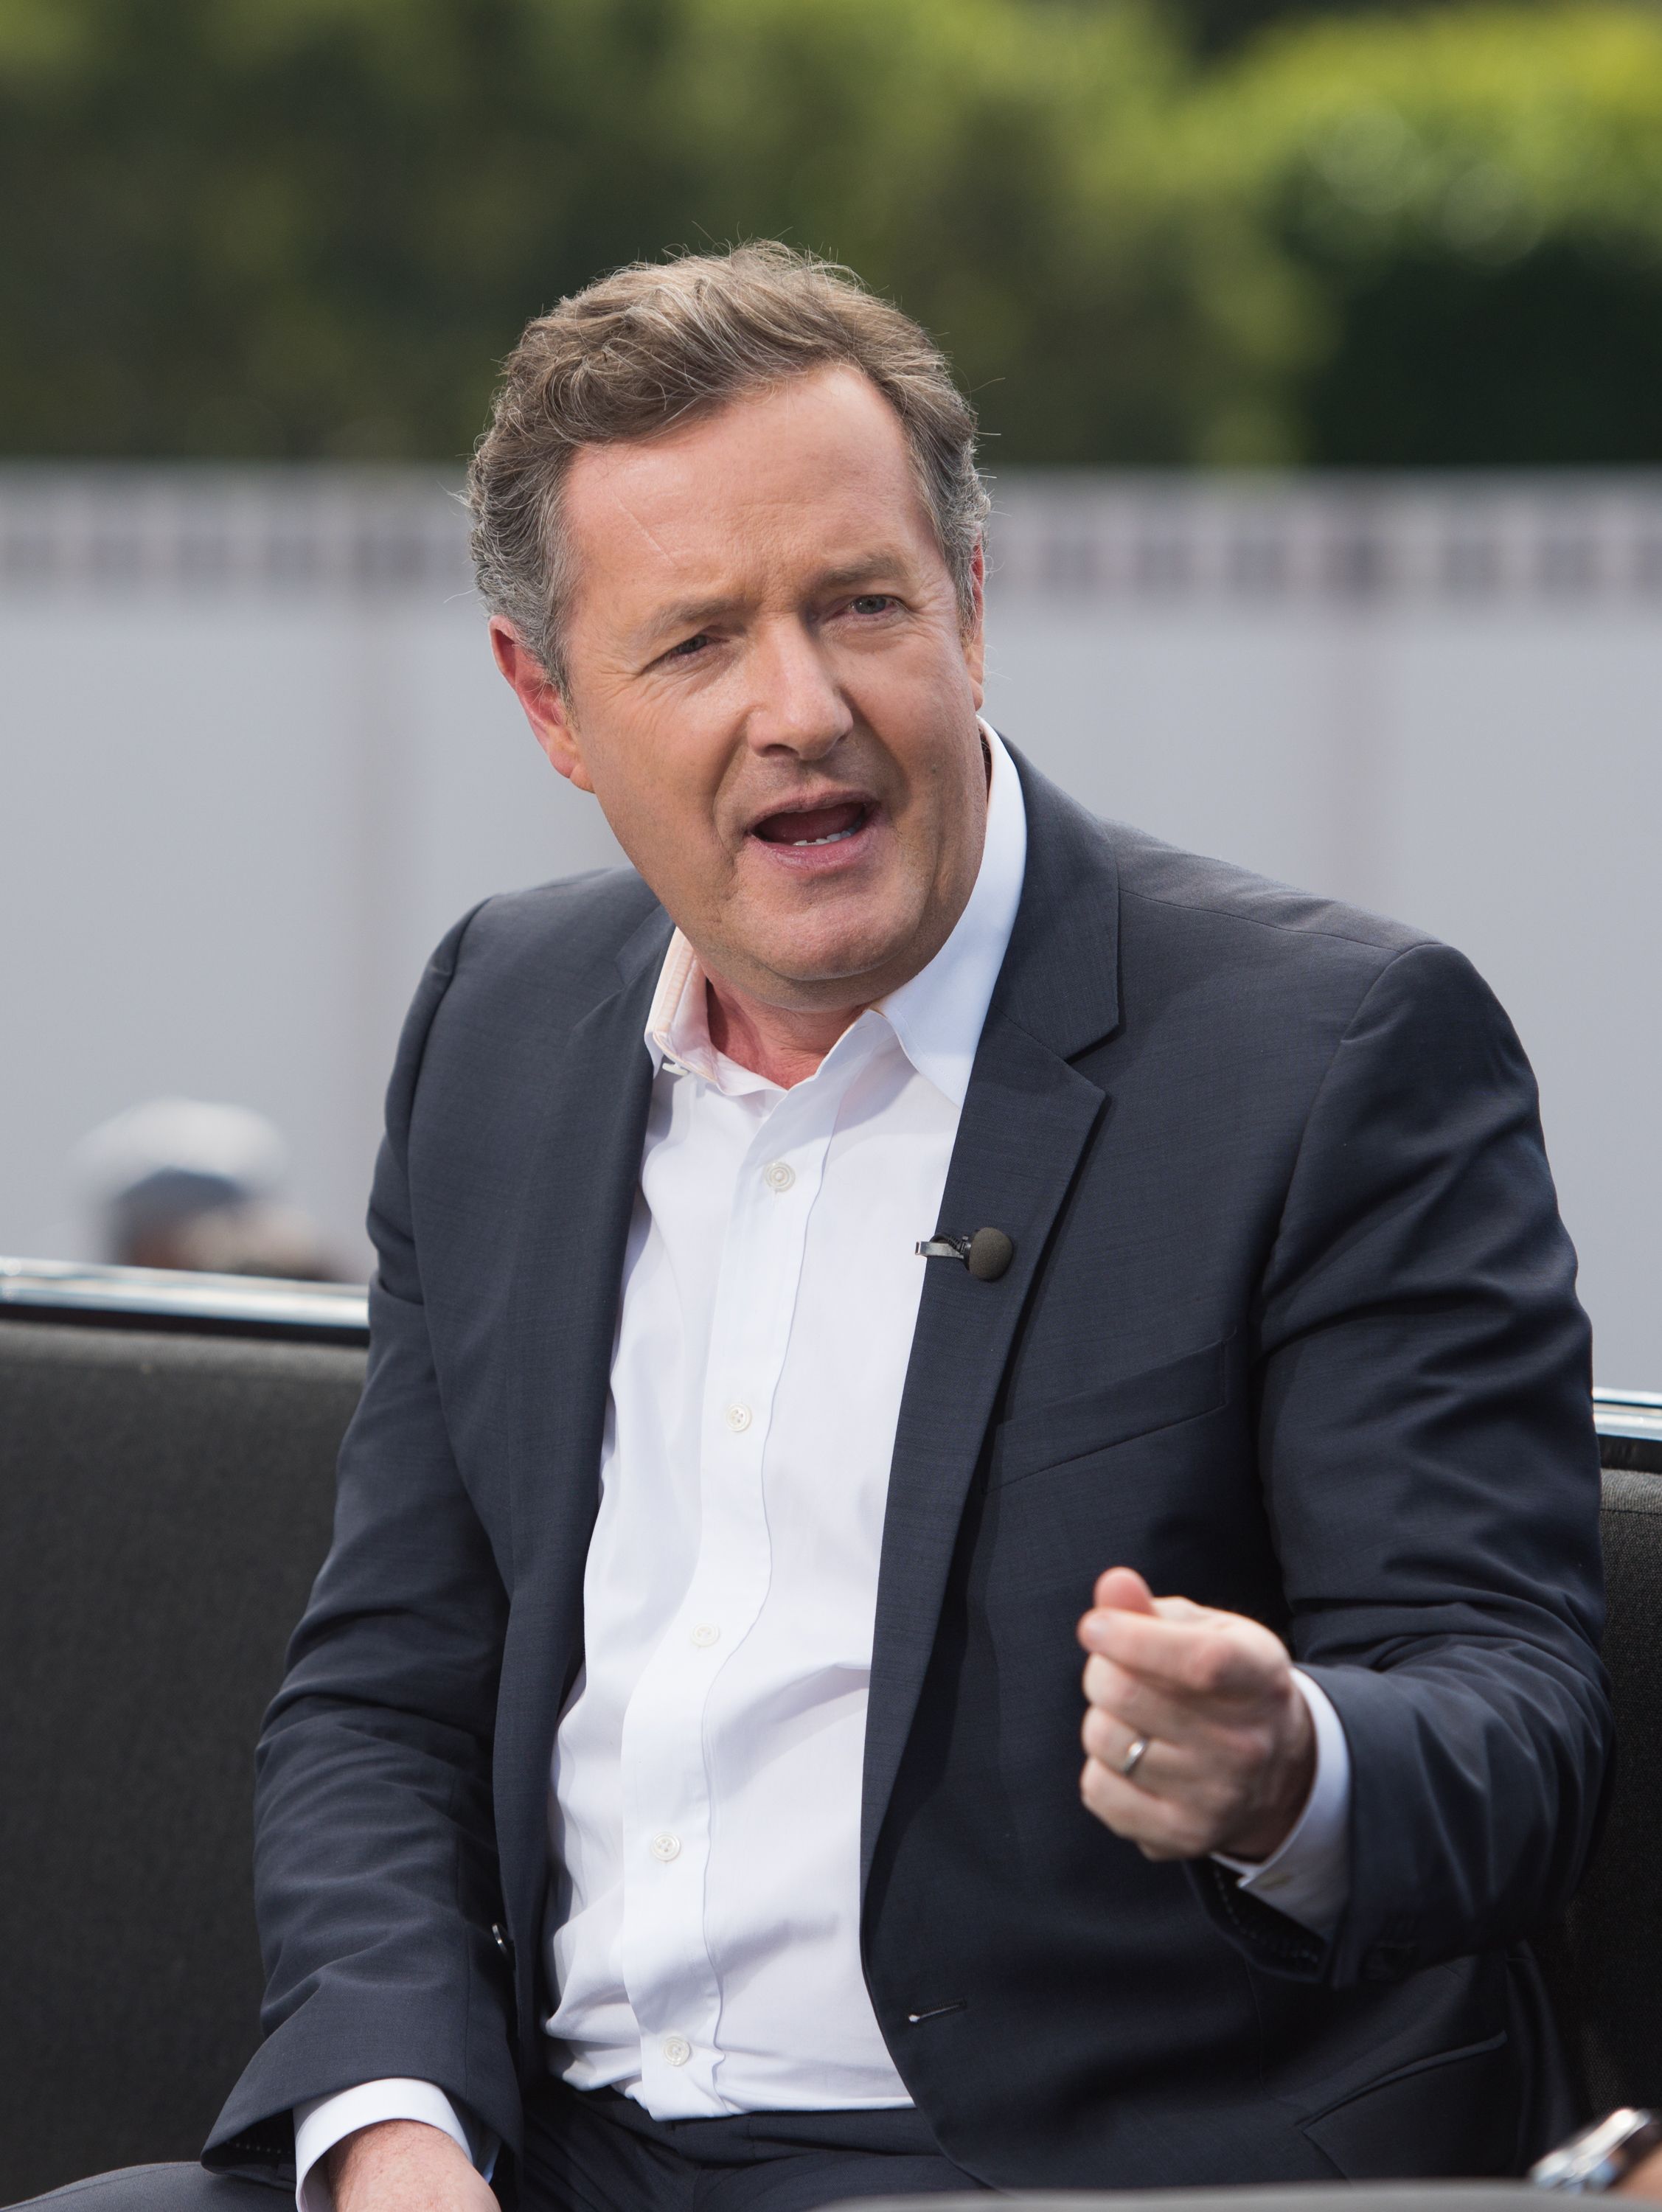 Piers Morgan visits "Extra" at Universal Studios Hollywood on February 11, 2016 | Photo: Getty Images